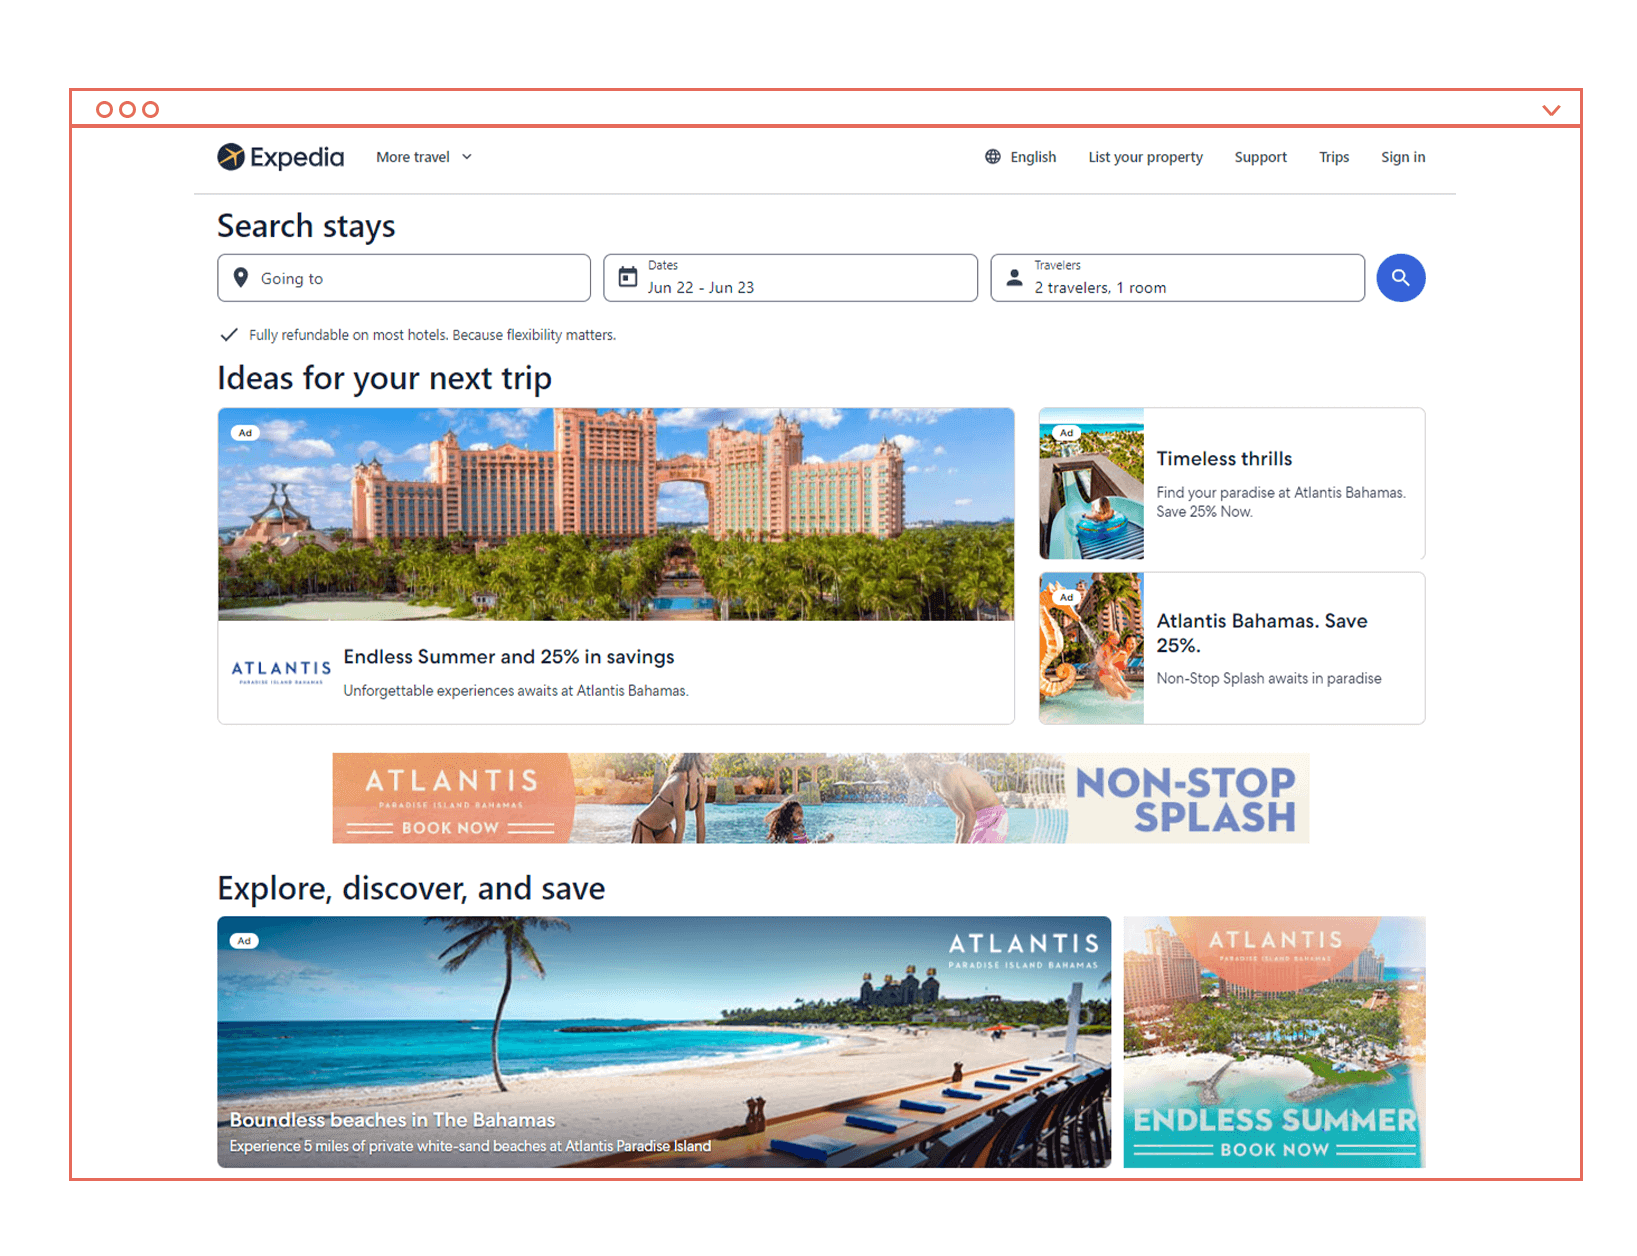 Wireframe mockup of web browser of Expedia.com showing Atlantis Bahamas ads in context